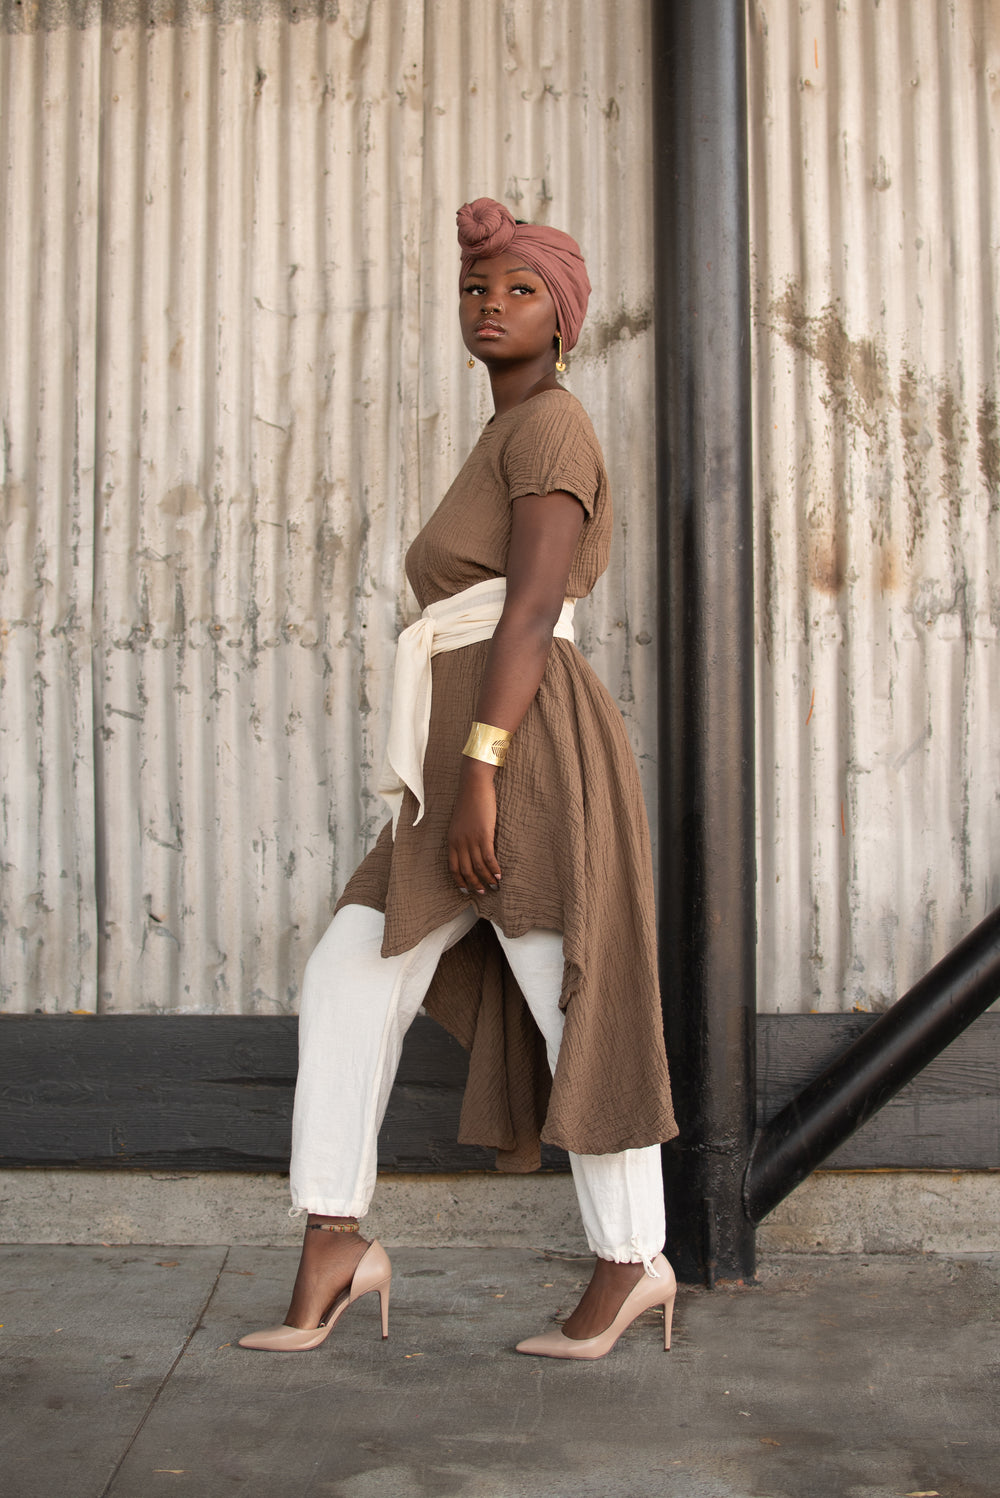 Female model dressed in rose head wrap with long brown tunic top and white bottoms. She has a white wrap around her middle as a sash and tan high heels.